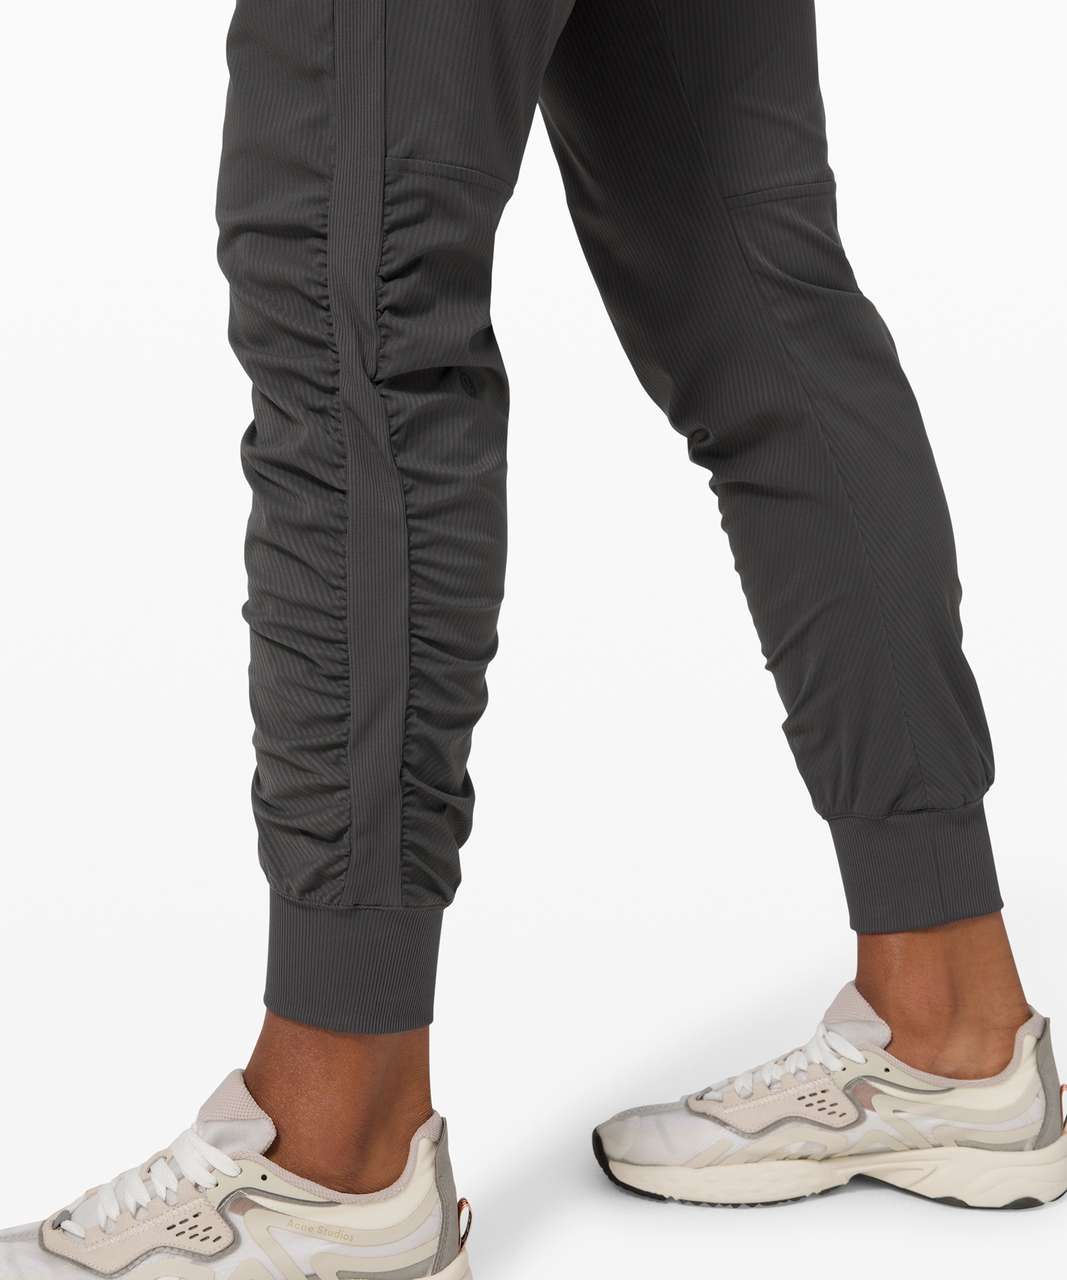 Lululemon Womens 10 Gray Beyond the Studio Joggers - $69 - From Amie